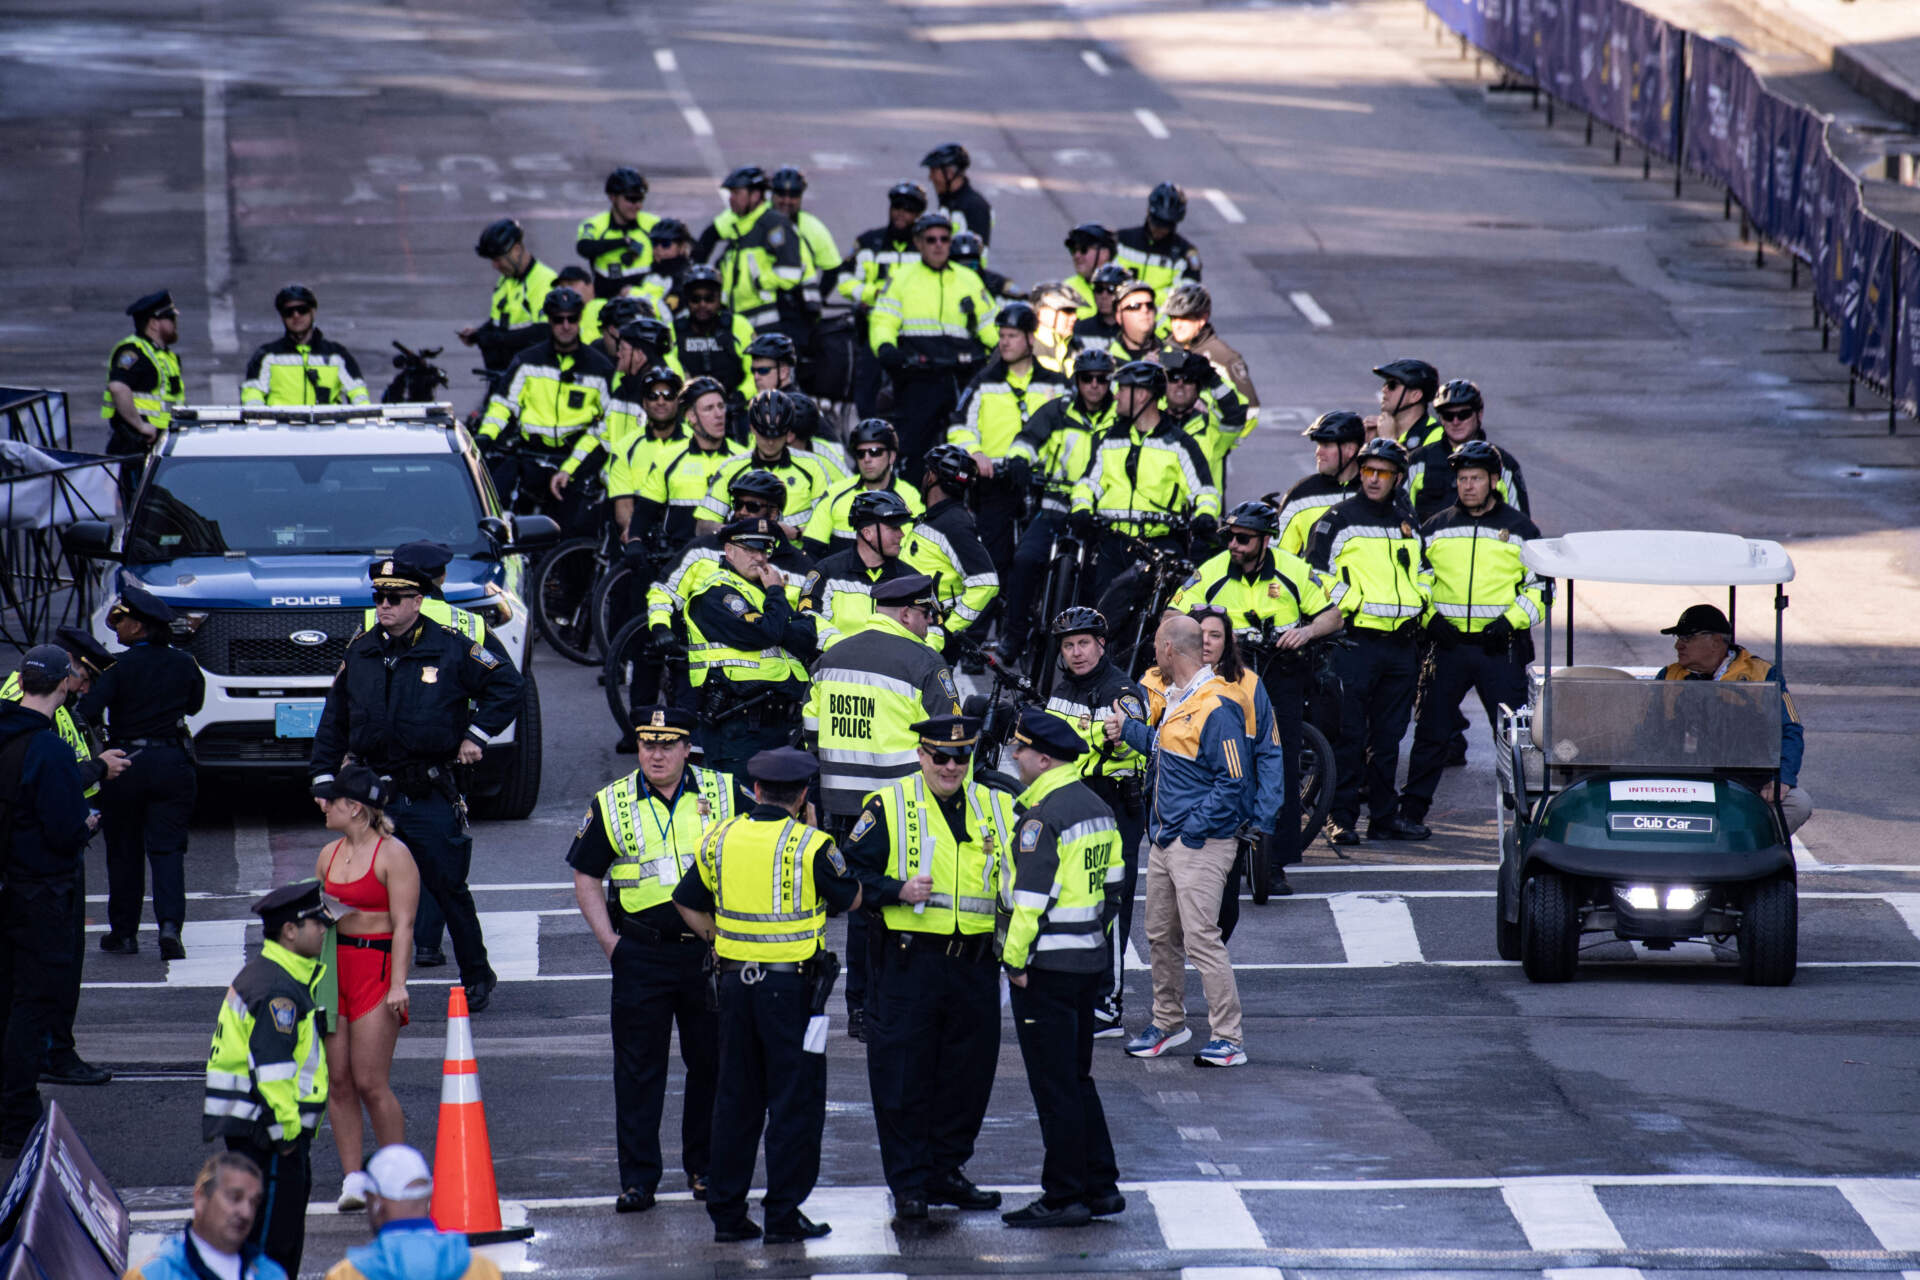 Police gather near the finish line just before the 128th Boston Marathon kicks off on April 15, 2024. The marathon includes around 30,000 athletes from 129 countries running the 26.2 miles from Hopkinton to Boston. (Joseph Prezioso/AFP via Getty Images)